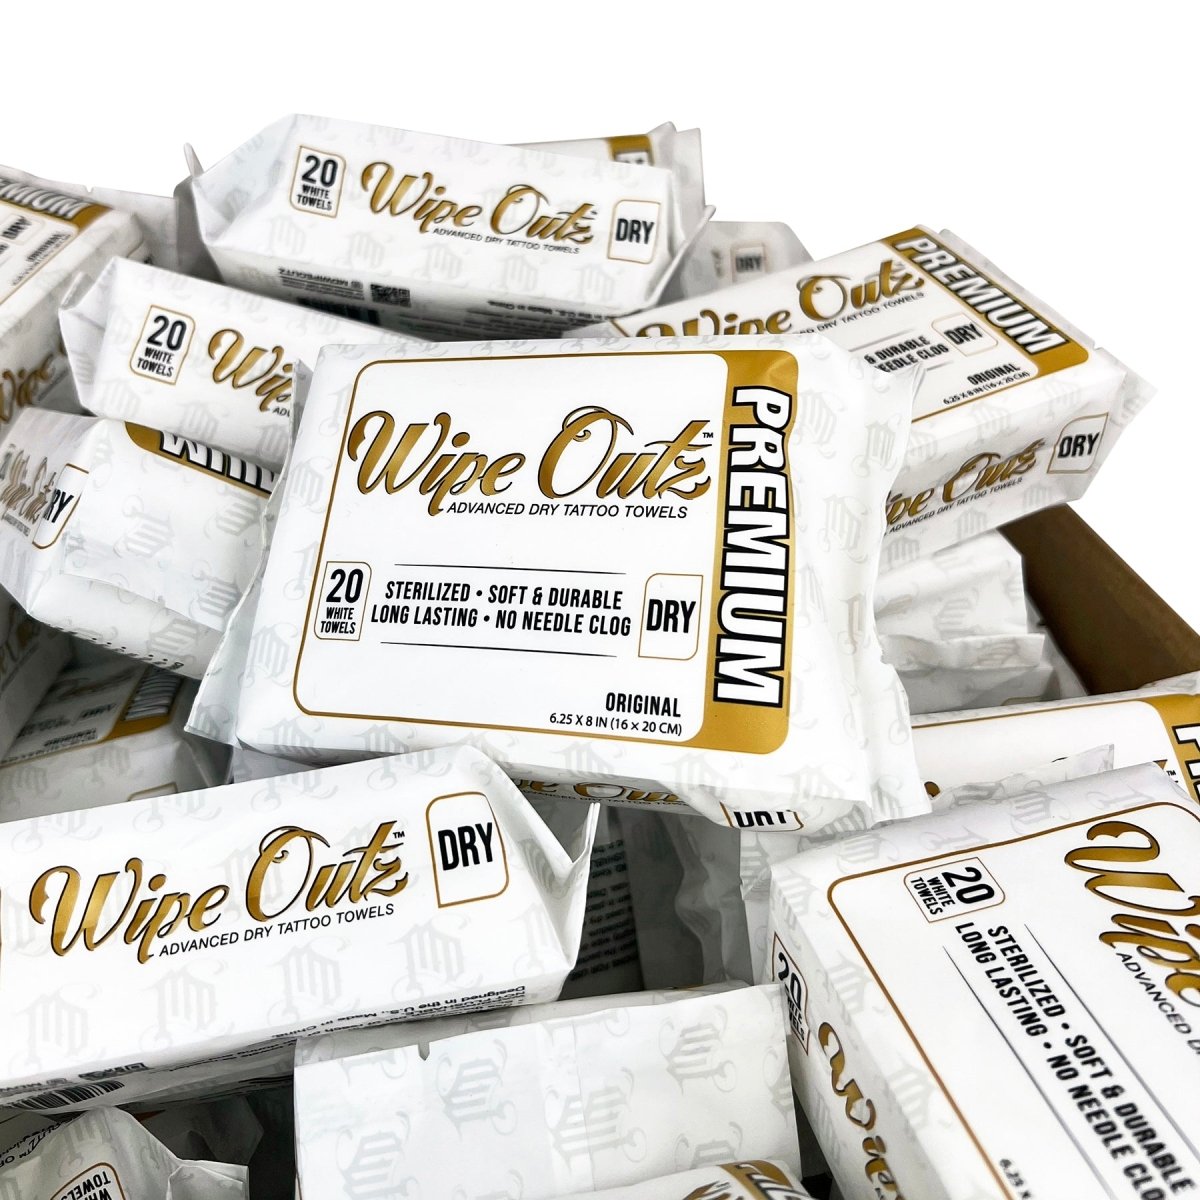 Wipe Outz Premium Dry Tattoo Towels (White 20 Count) PREORDER - MD Wipe Outz